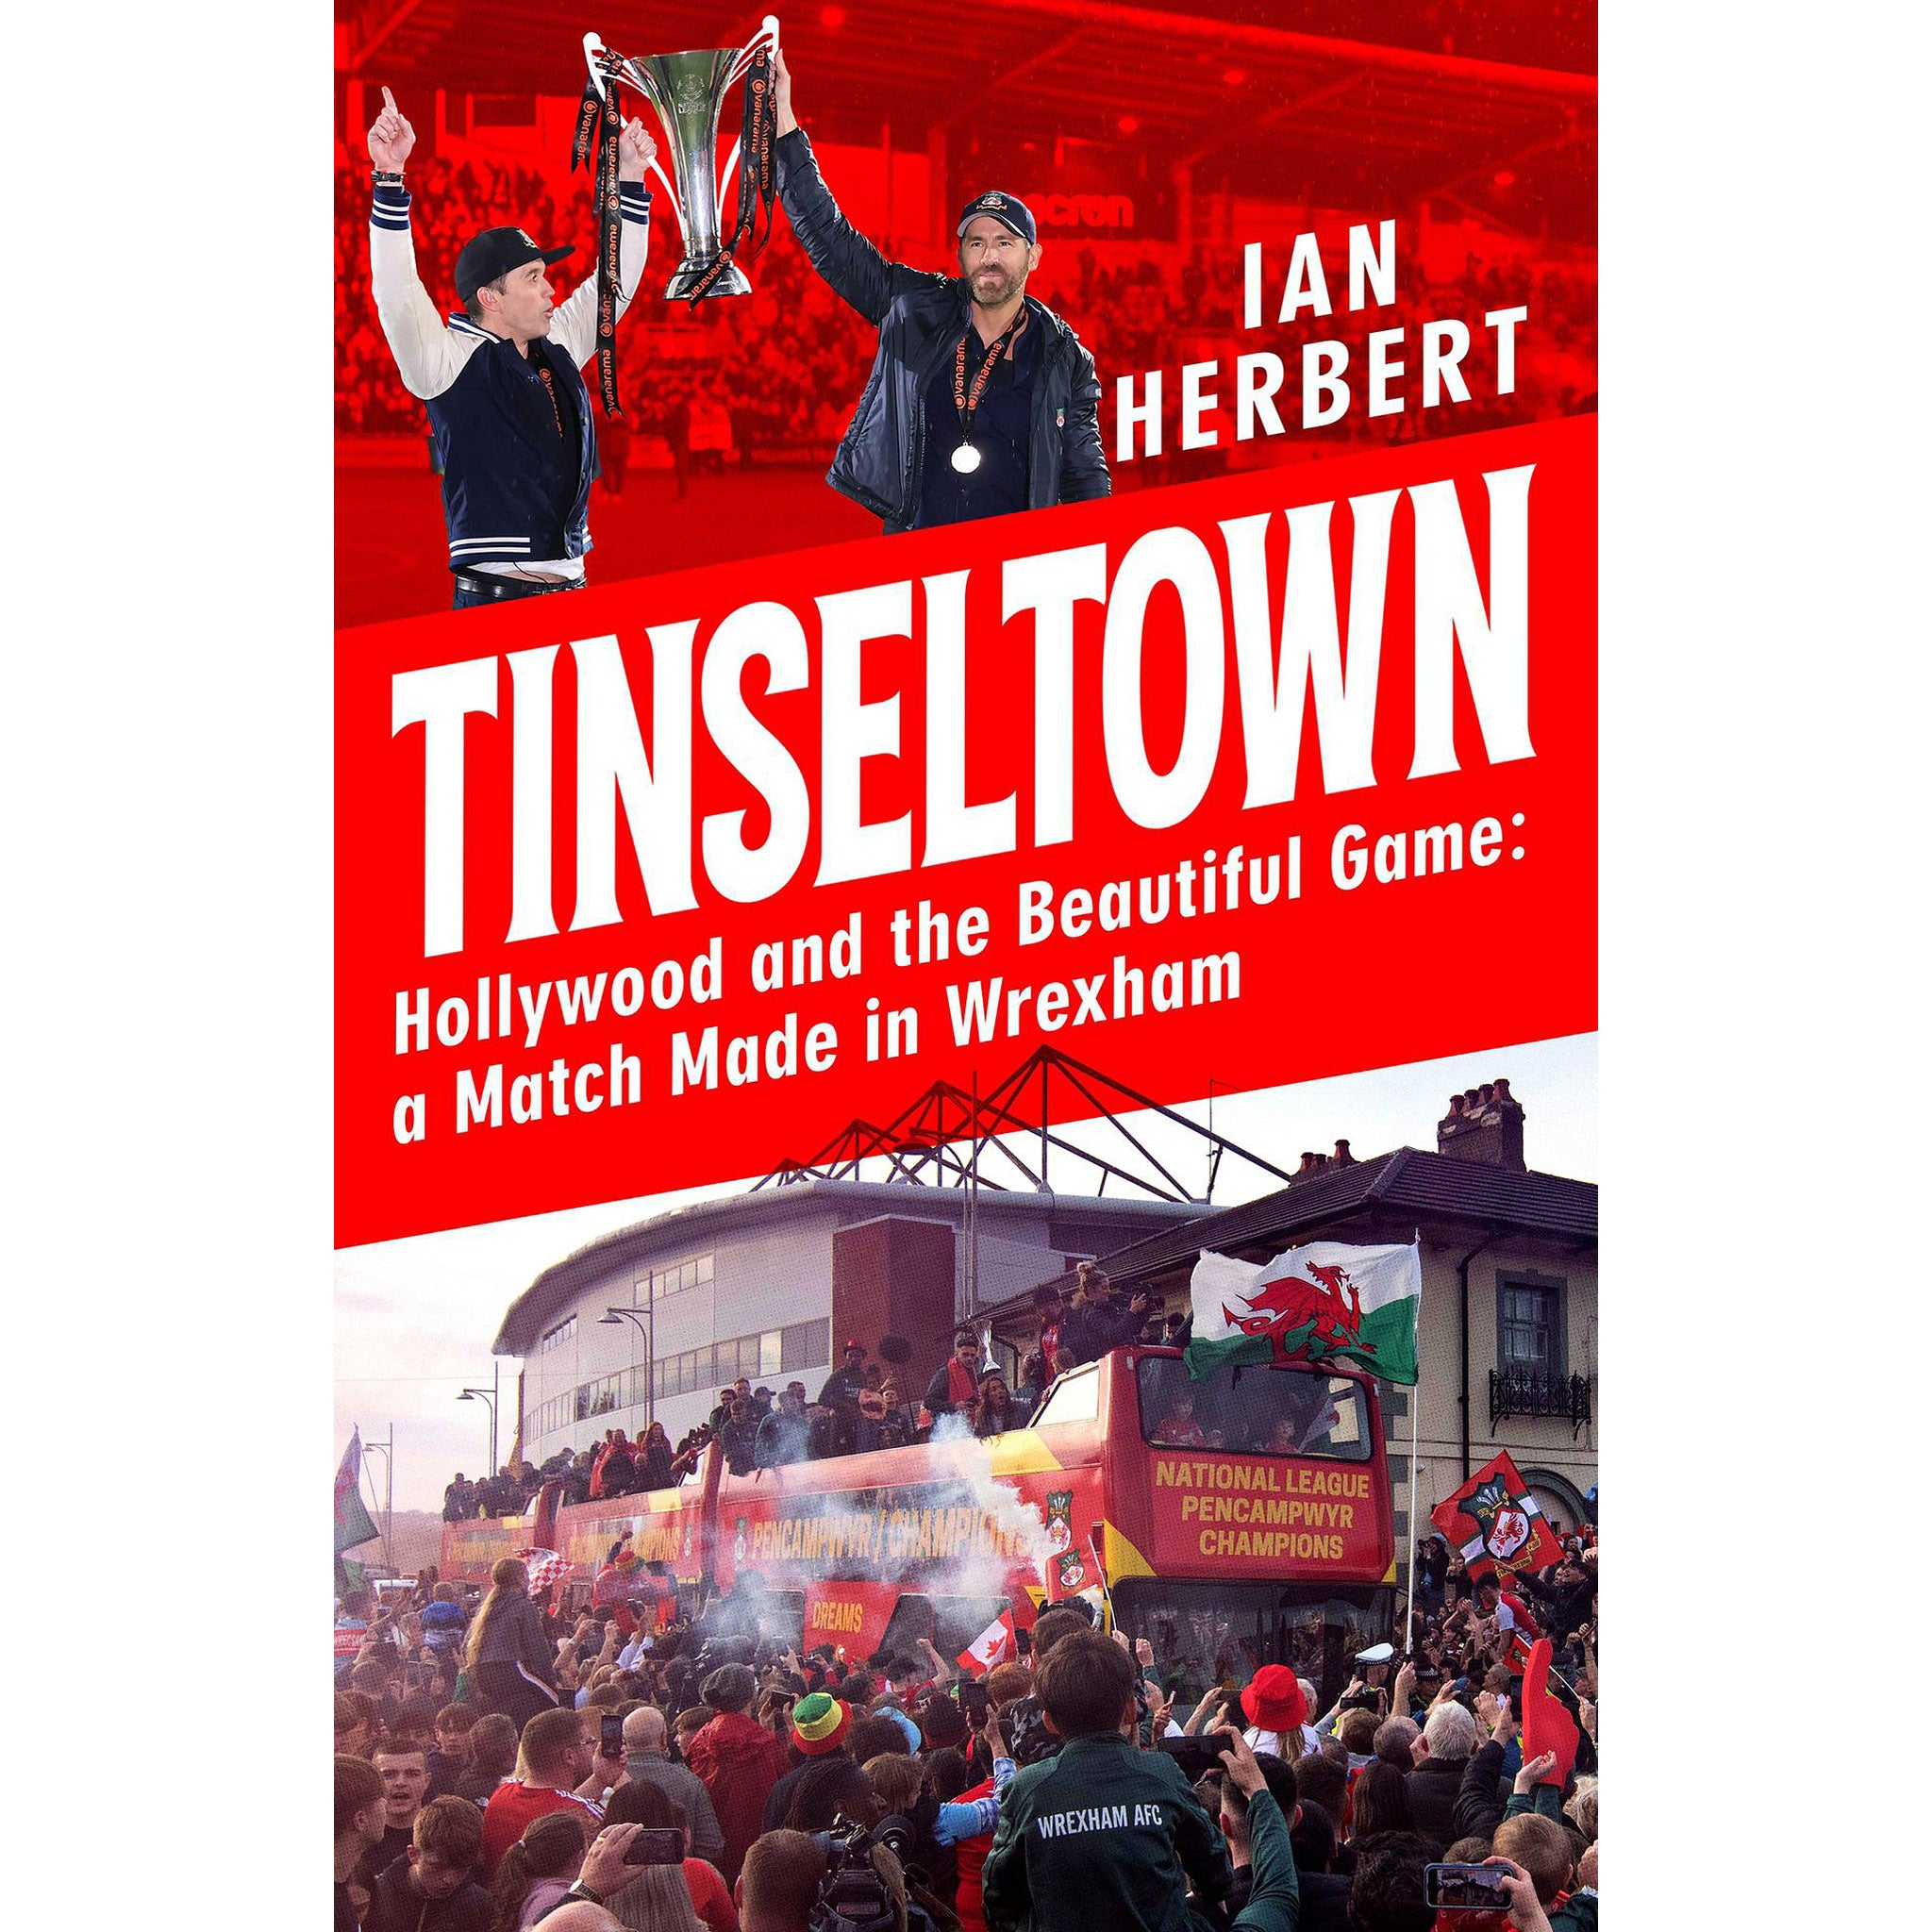 Tinseltown – Hollywood and the Beautiful Game: a Match Made in Wrexham